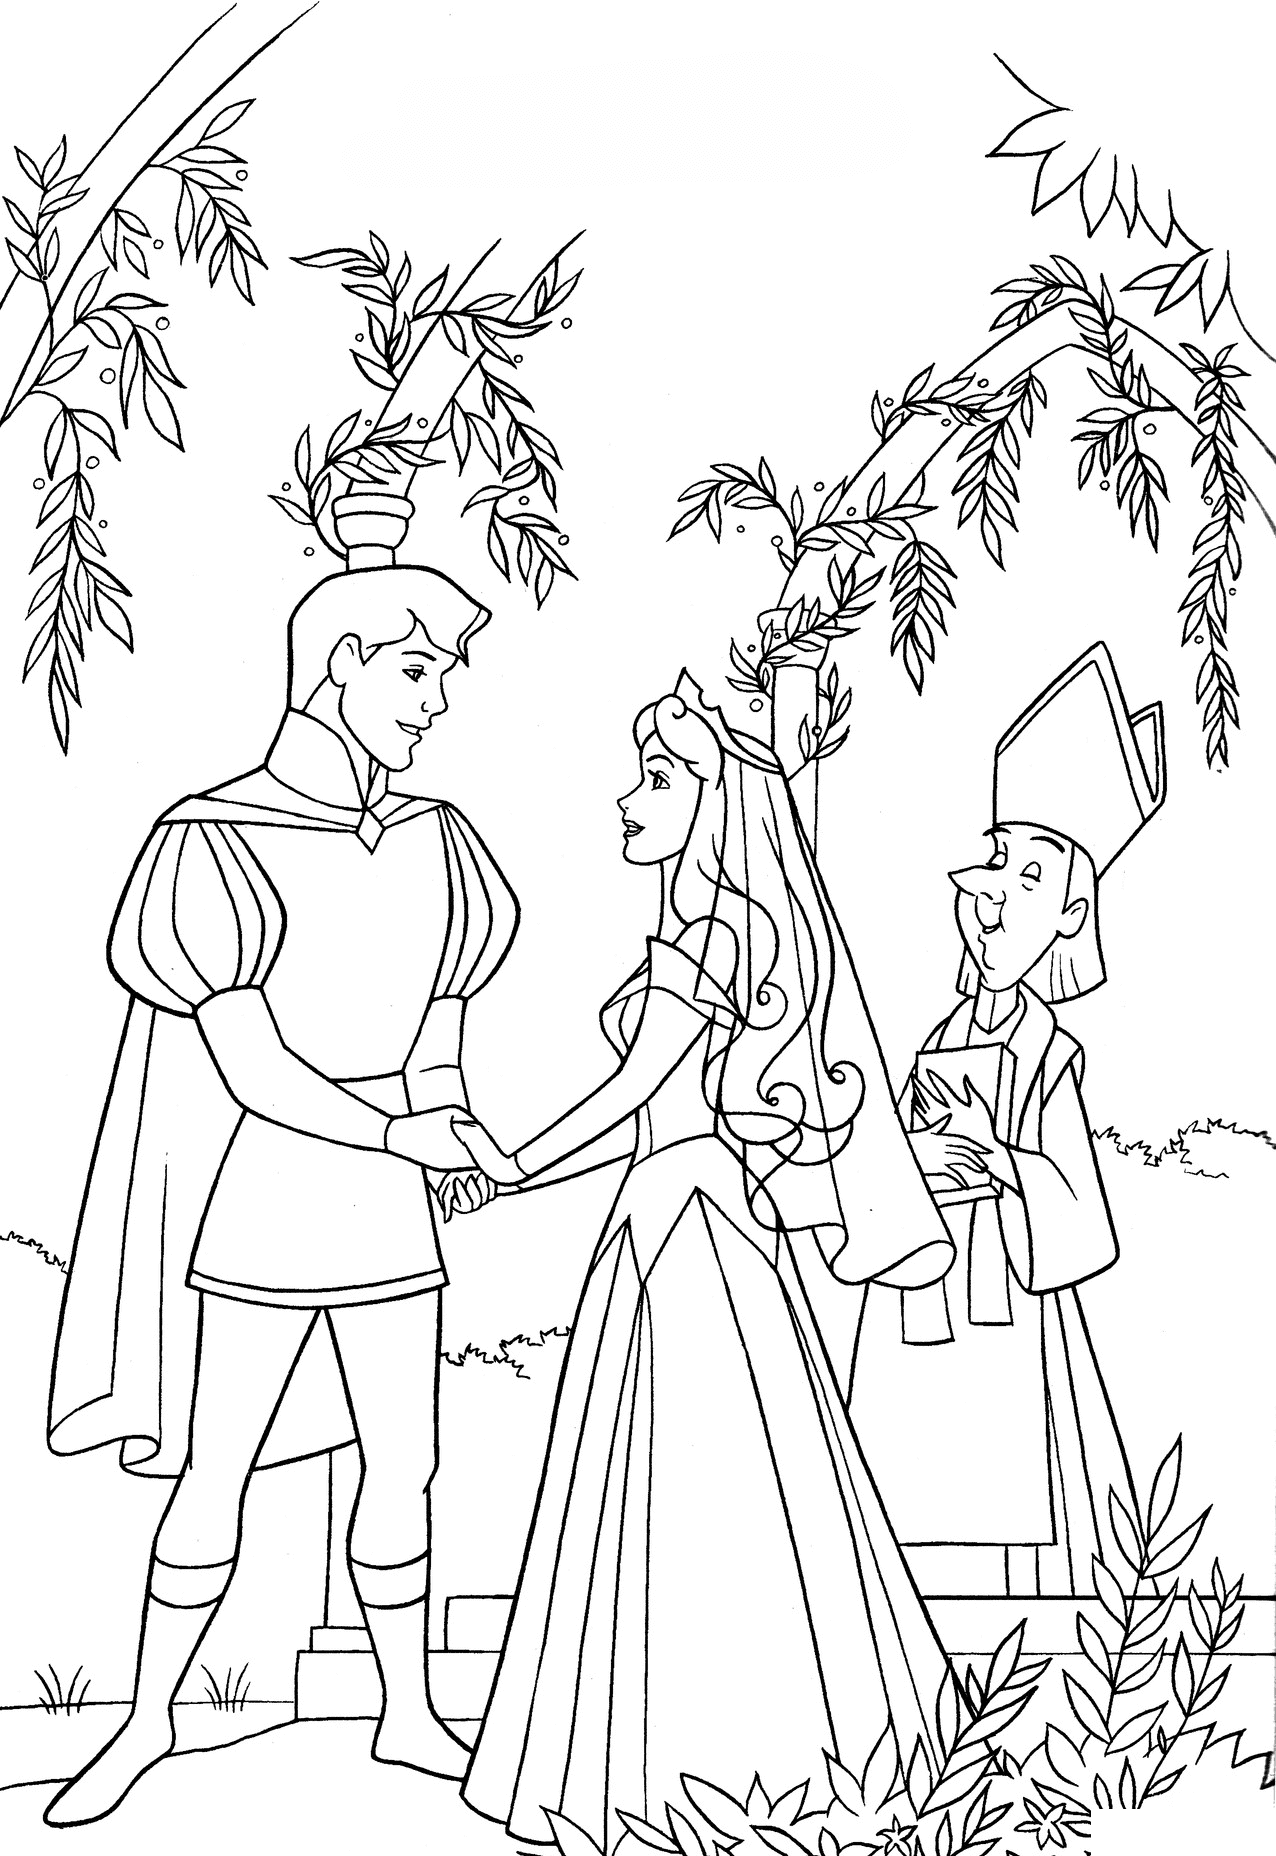 Aurora and Phillip Holds Hands Coloring Page